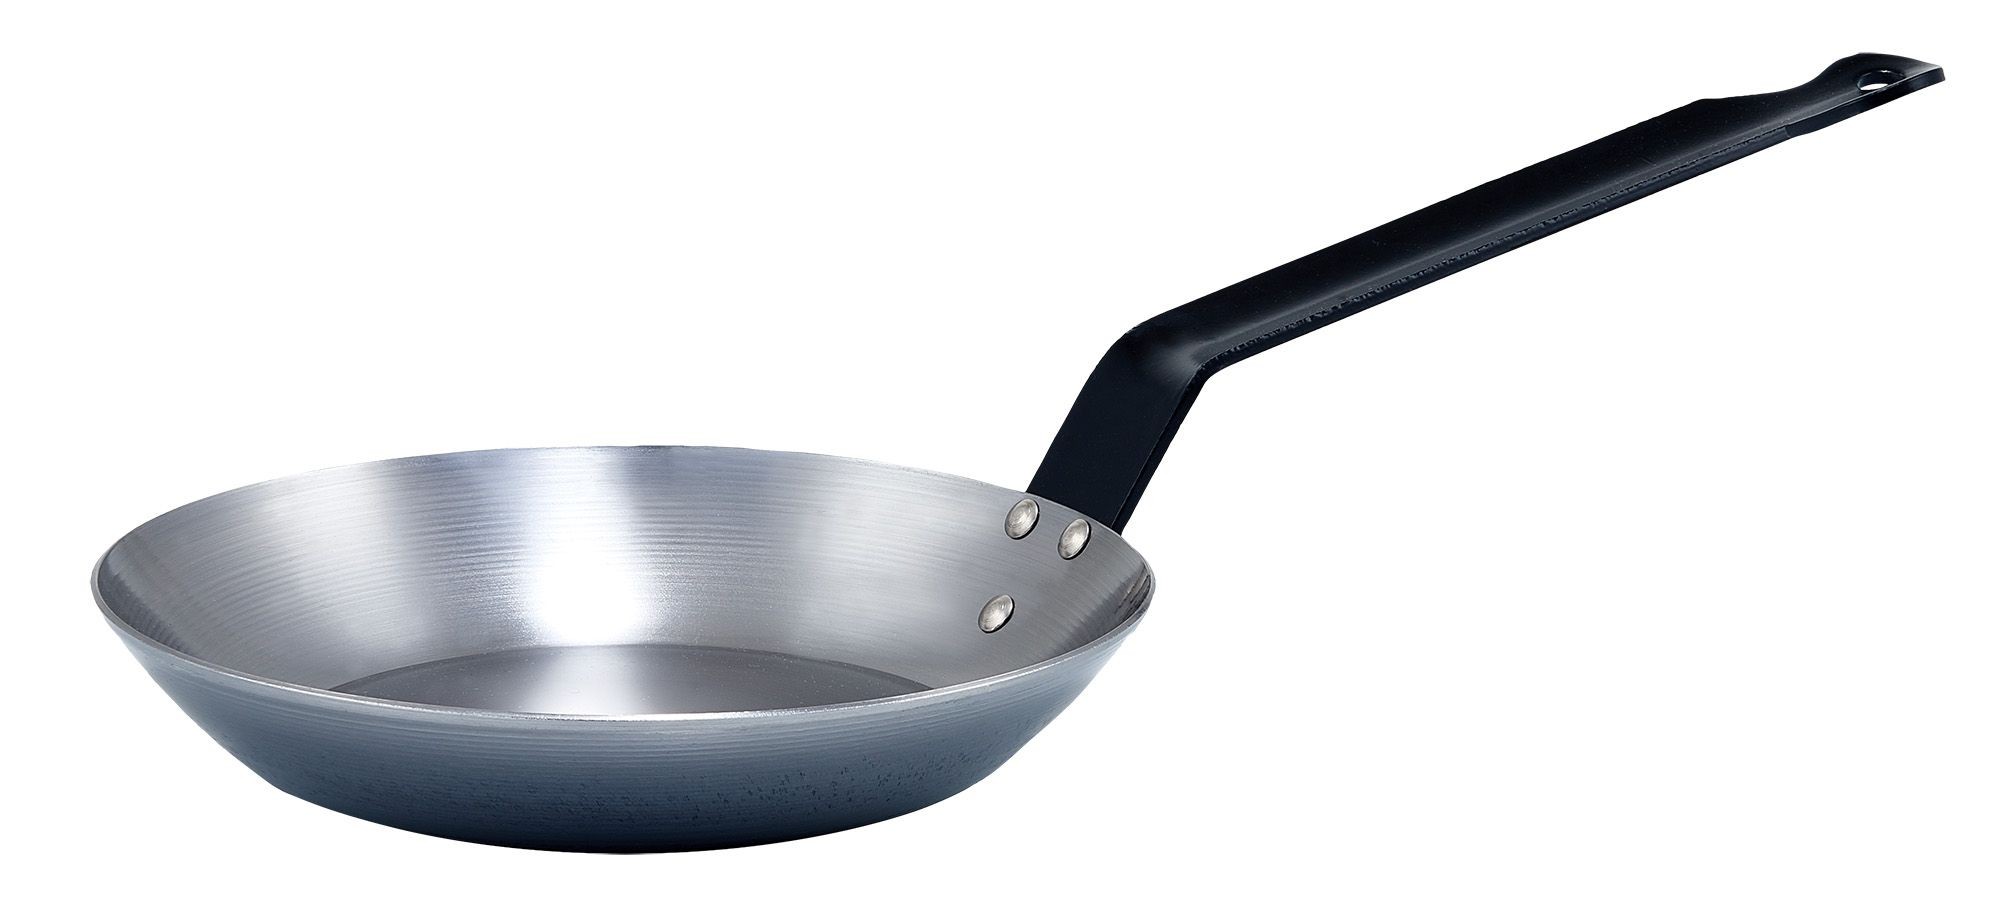 Winco CSFP-7 French Style Carbon Steel Fry Pan 7-7/8"